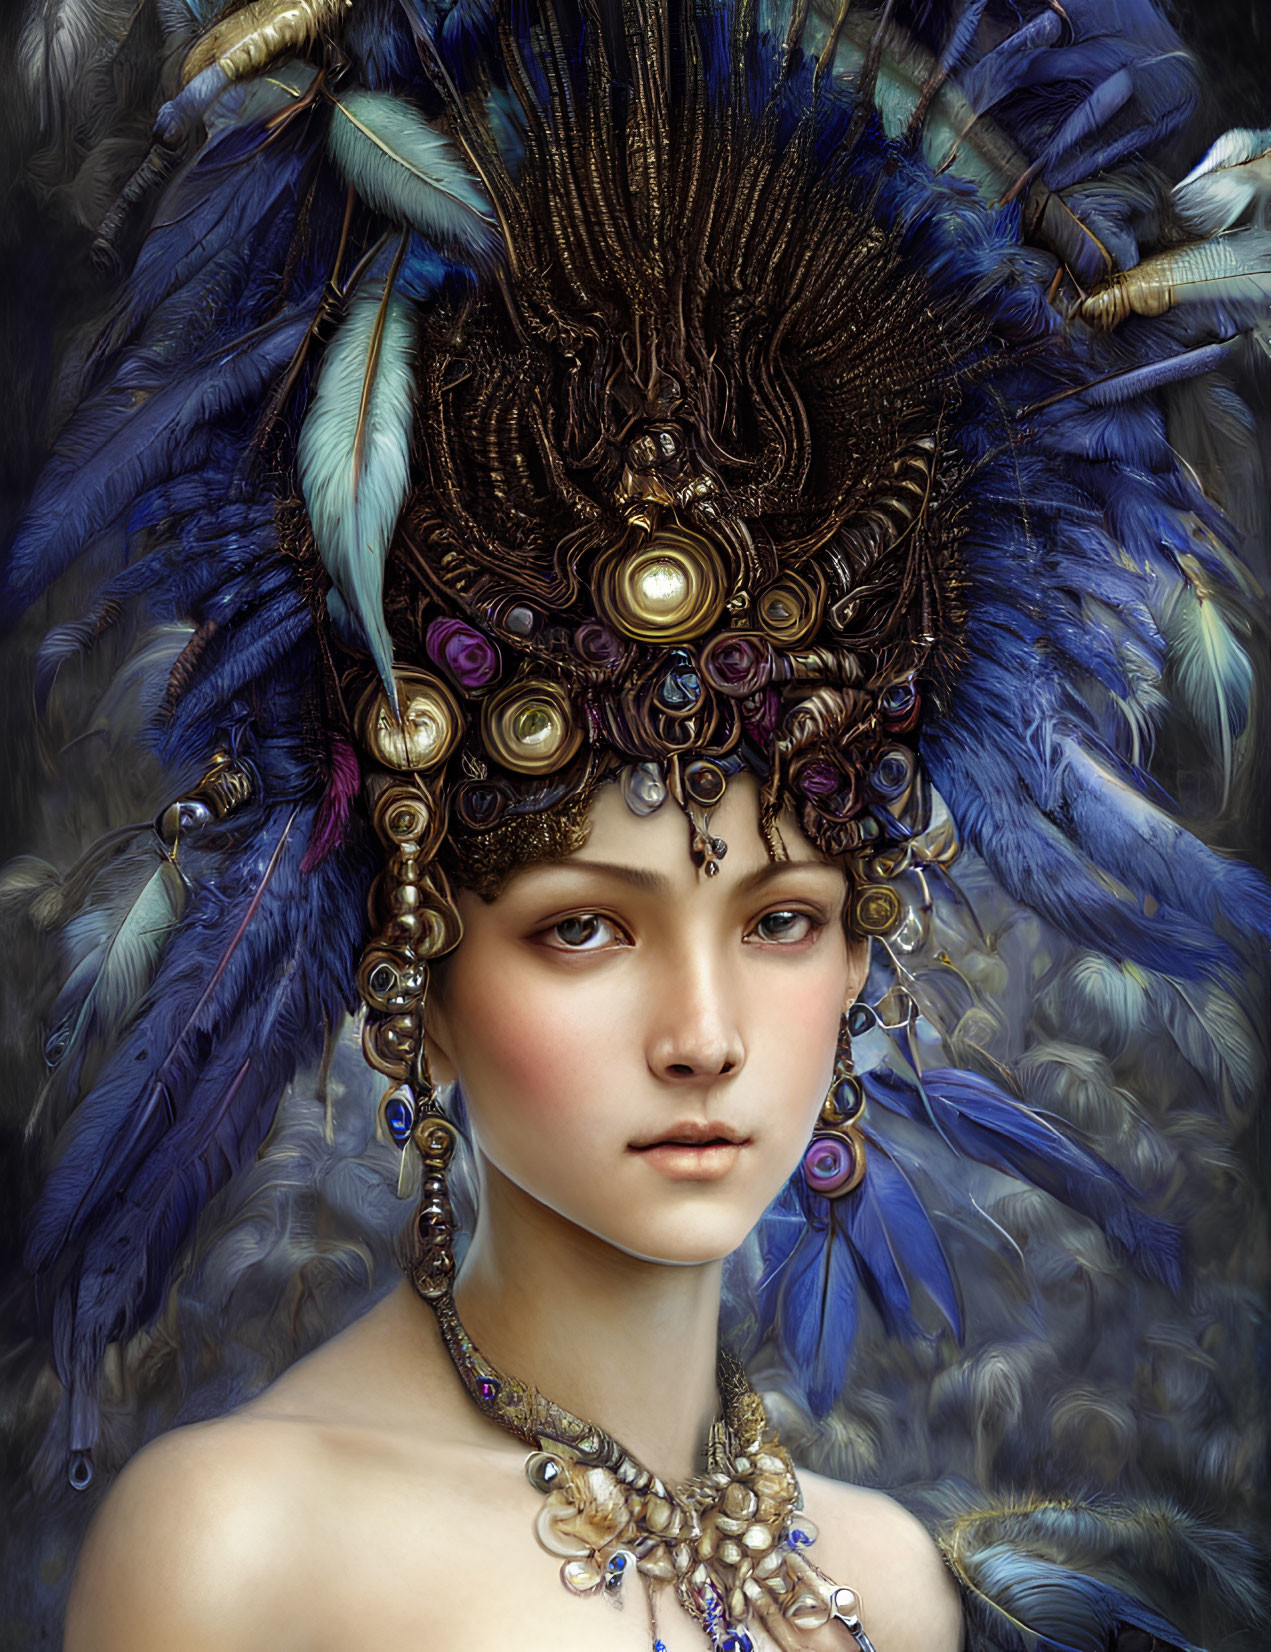 Portrait of person with fair skin in feather headdress and golden crown.